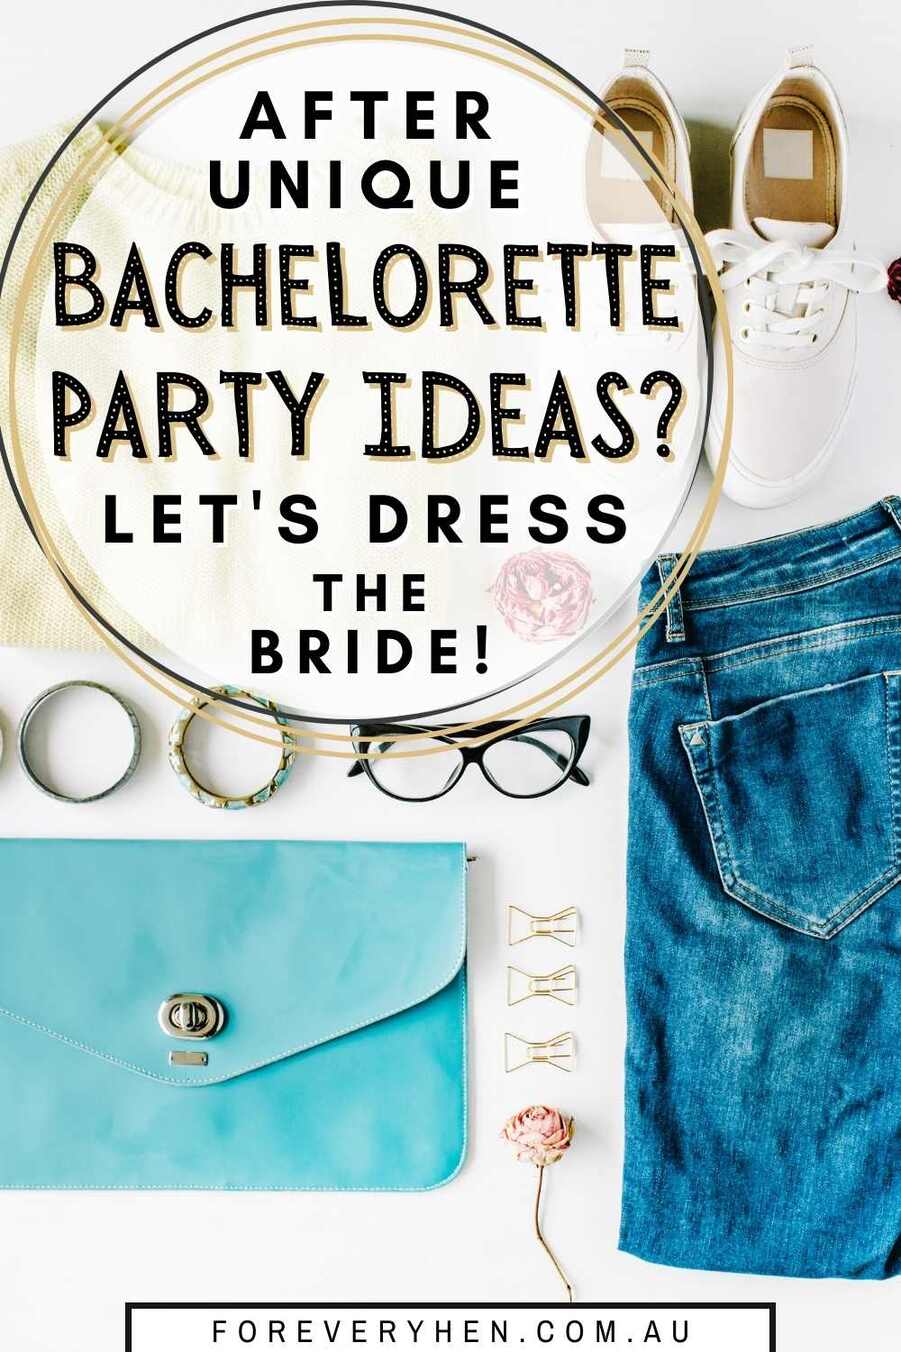 Image of clothes, earrings, purse and hair clips on a table. Text overlay: After unique bachelorette party games? Let's dress the bride!